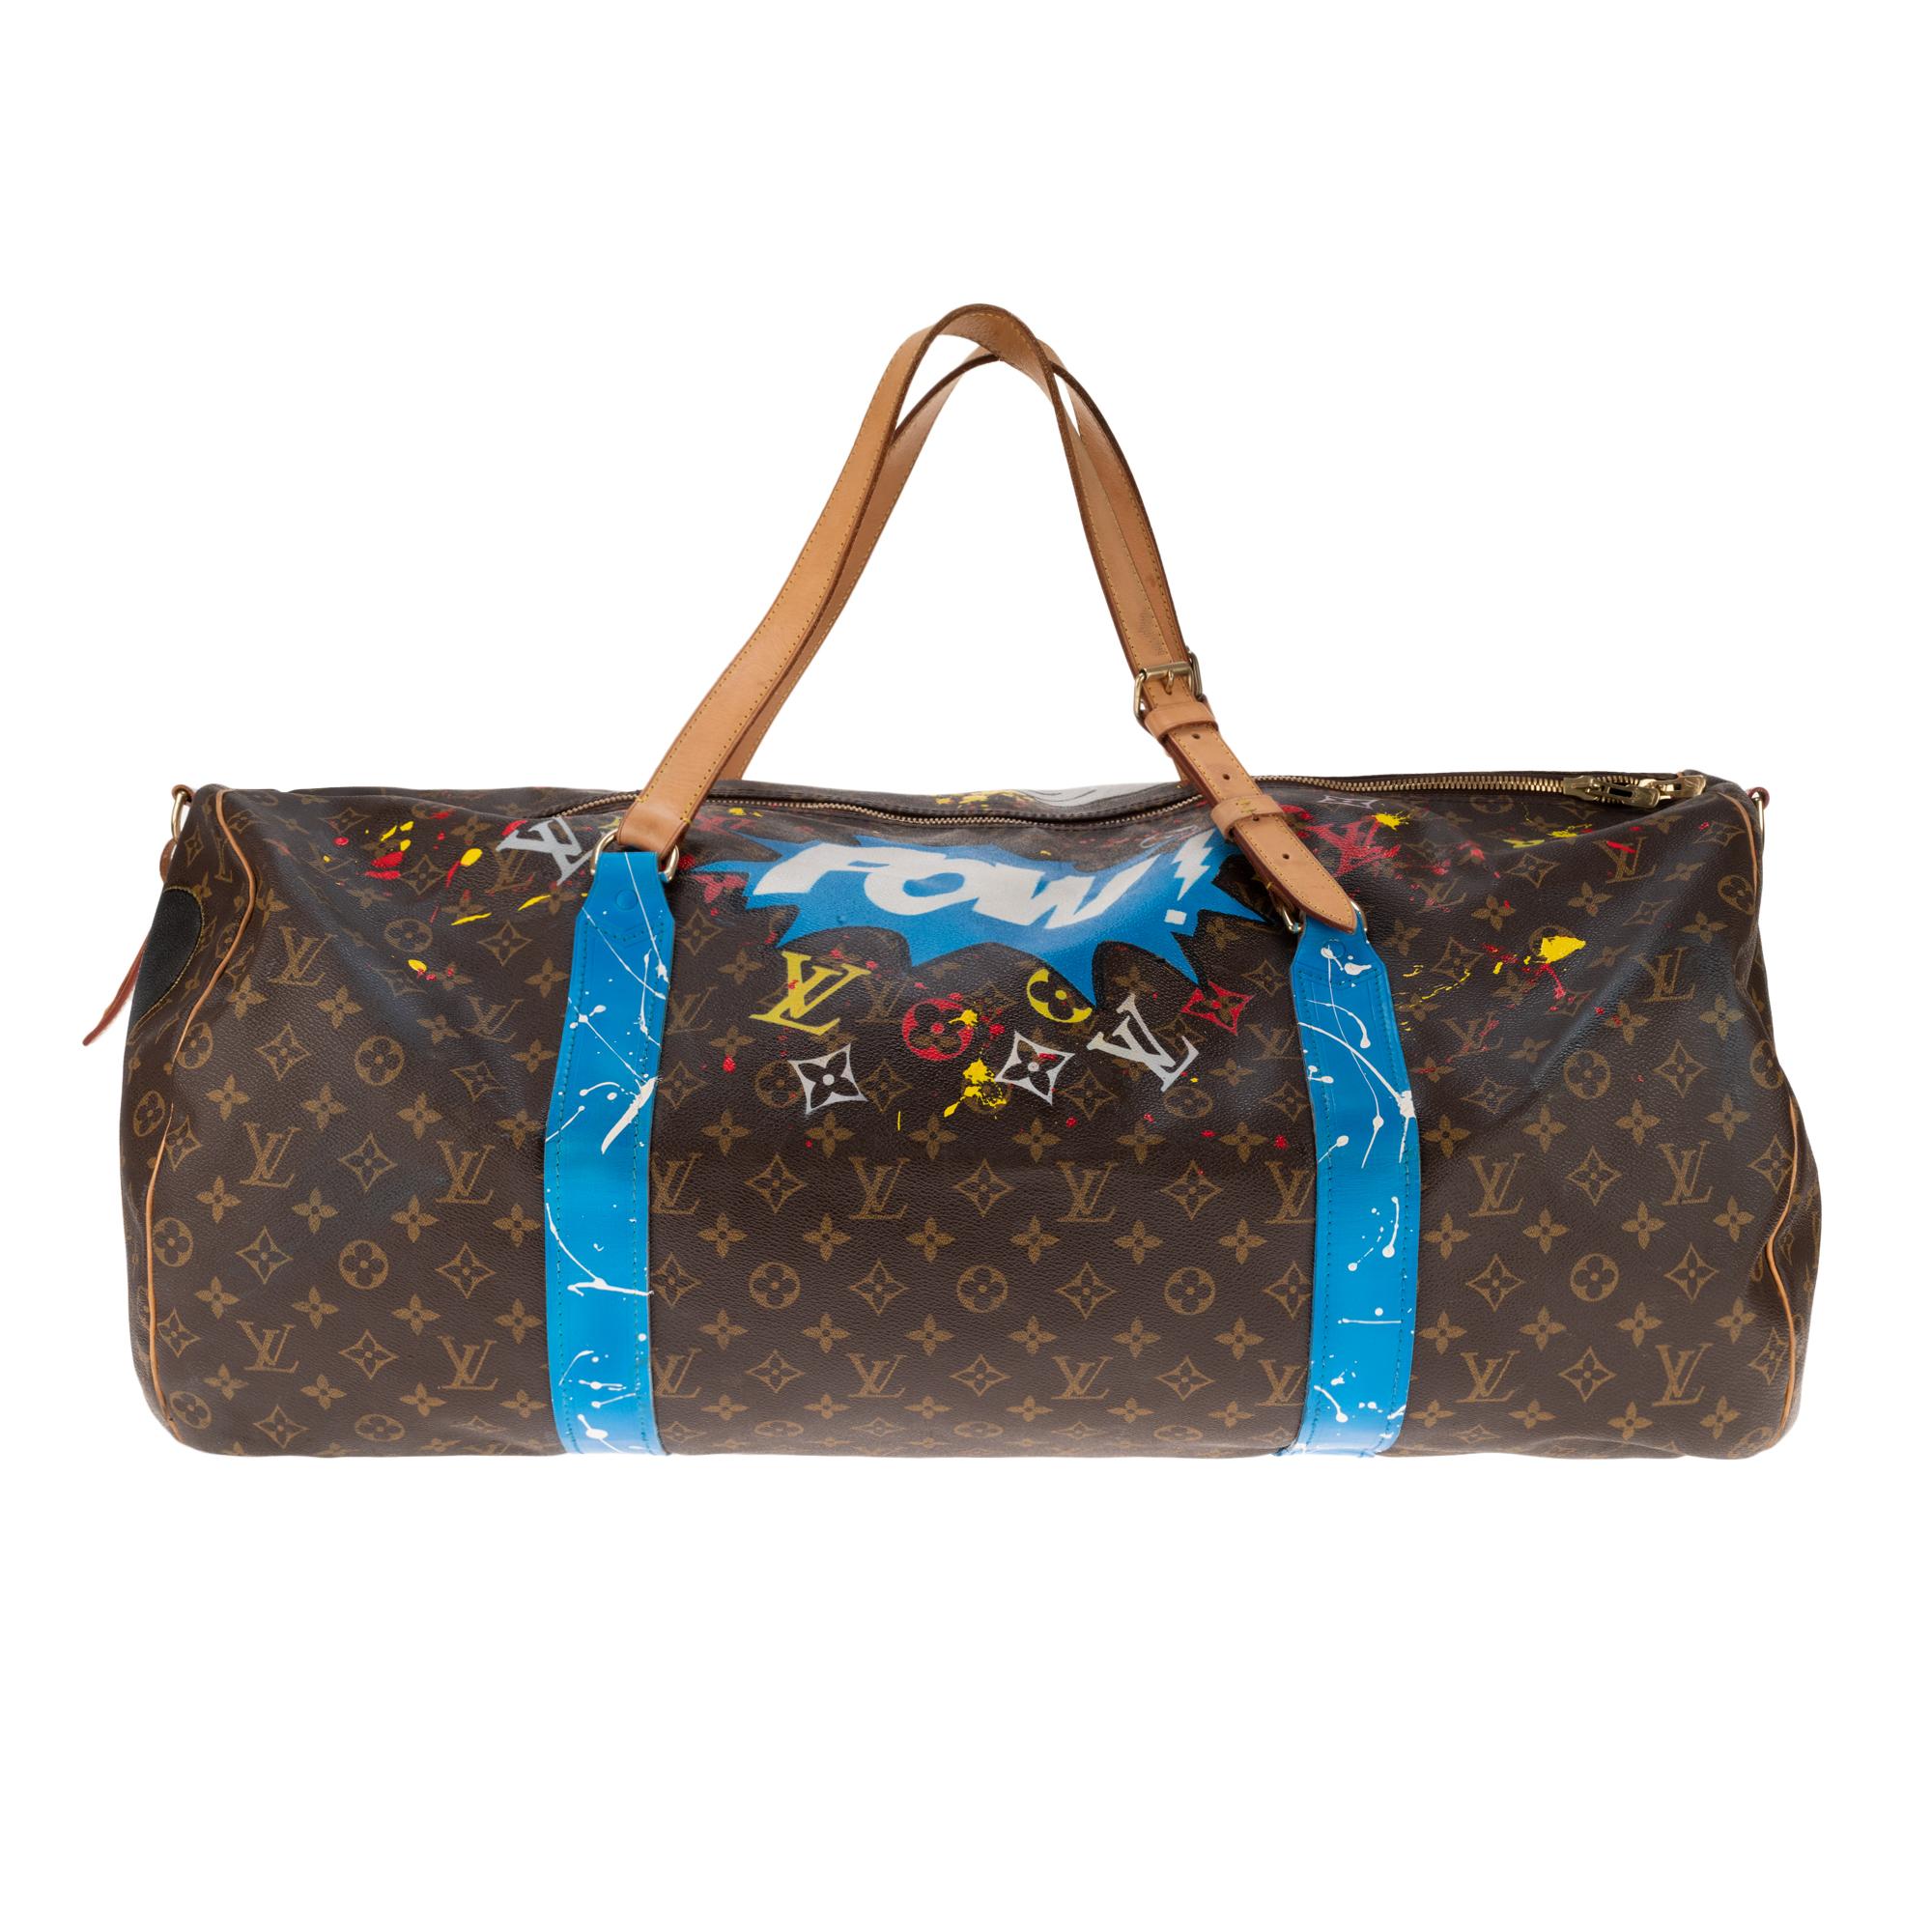 We are delighted to present the latest work of our streetart artist PatBo with the customization on the theme of Disney with the travel bag Louis Vuitton 